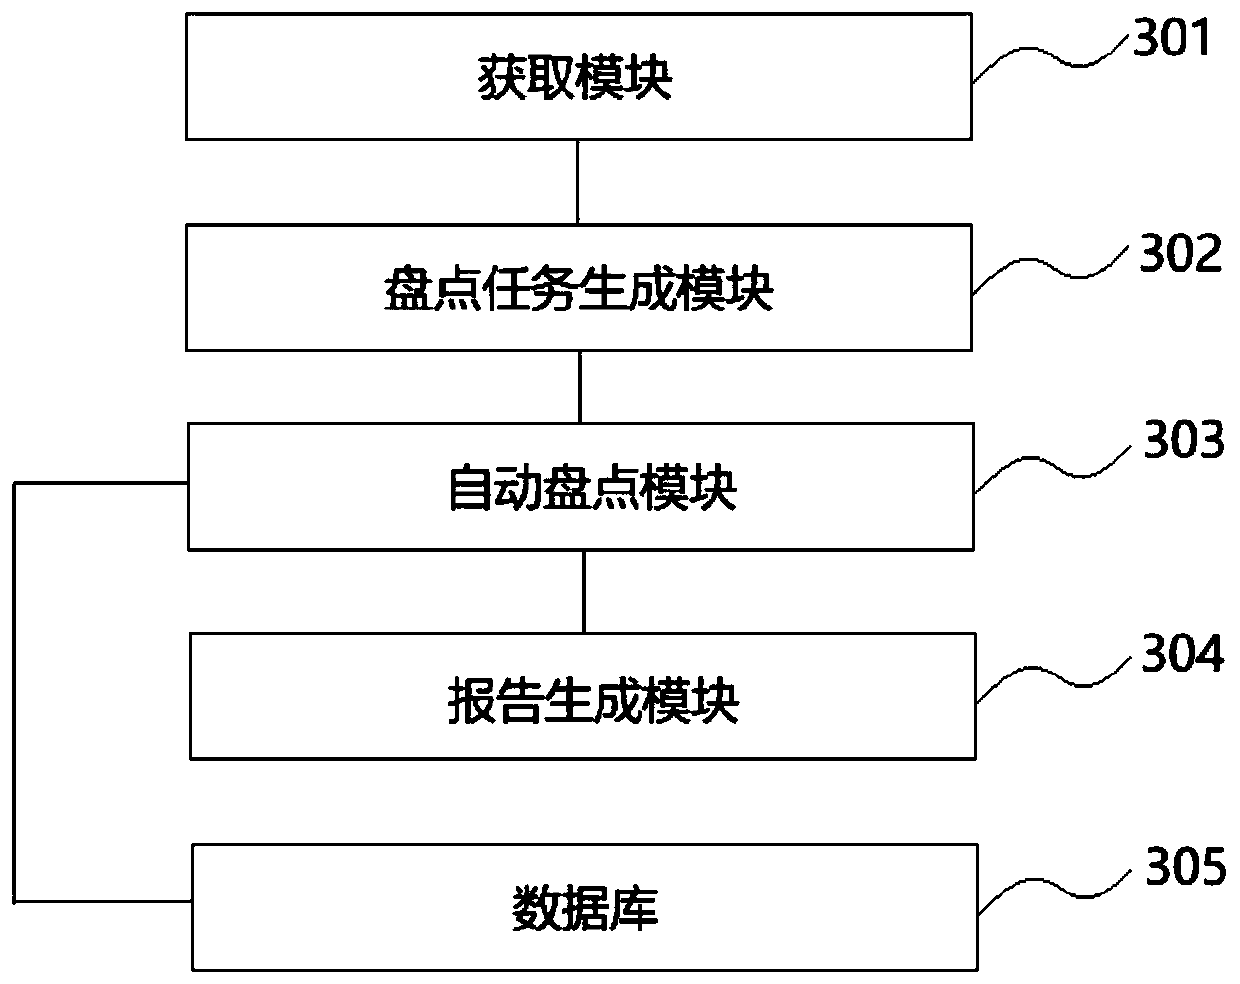 Signature card automatic inventory method and device